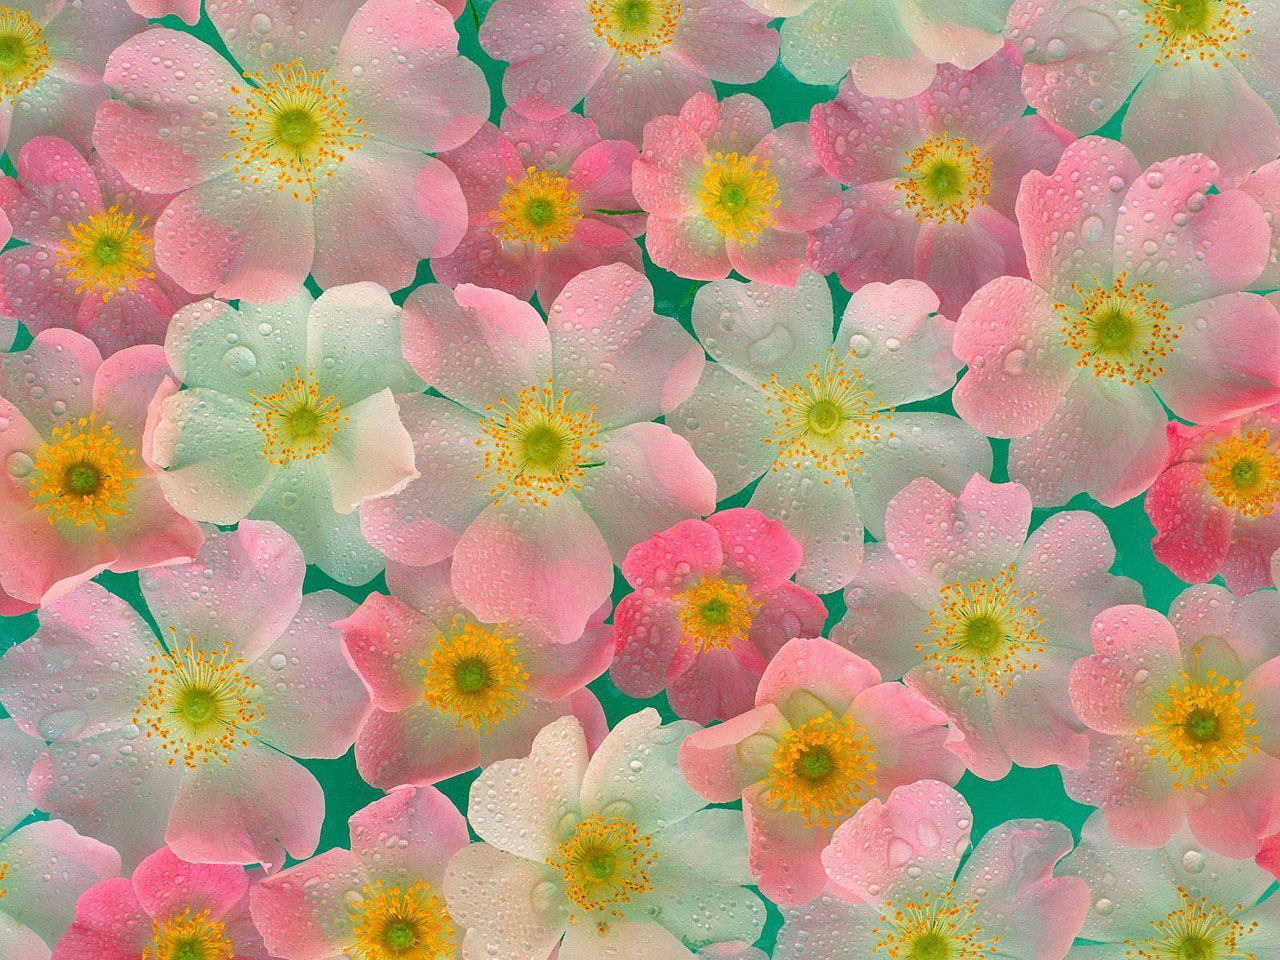 25 Beautiful Flower Wallpapers for your desktop - Flower Pictures